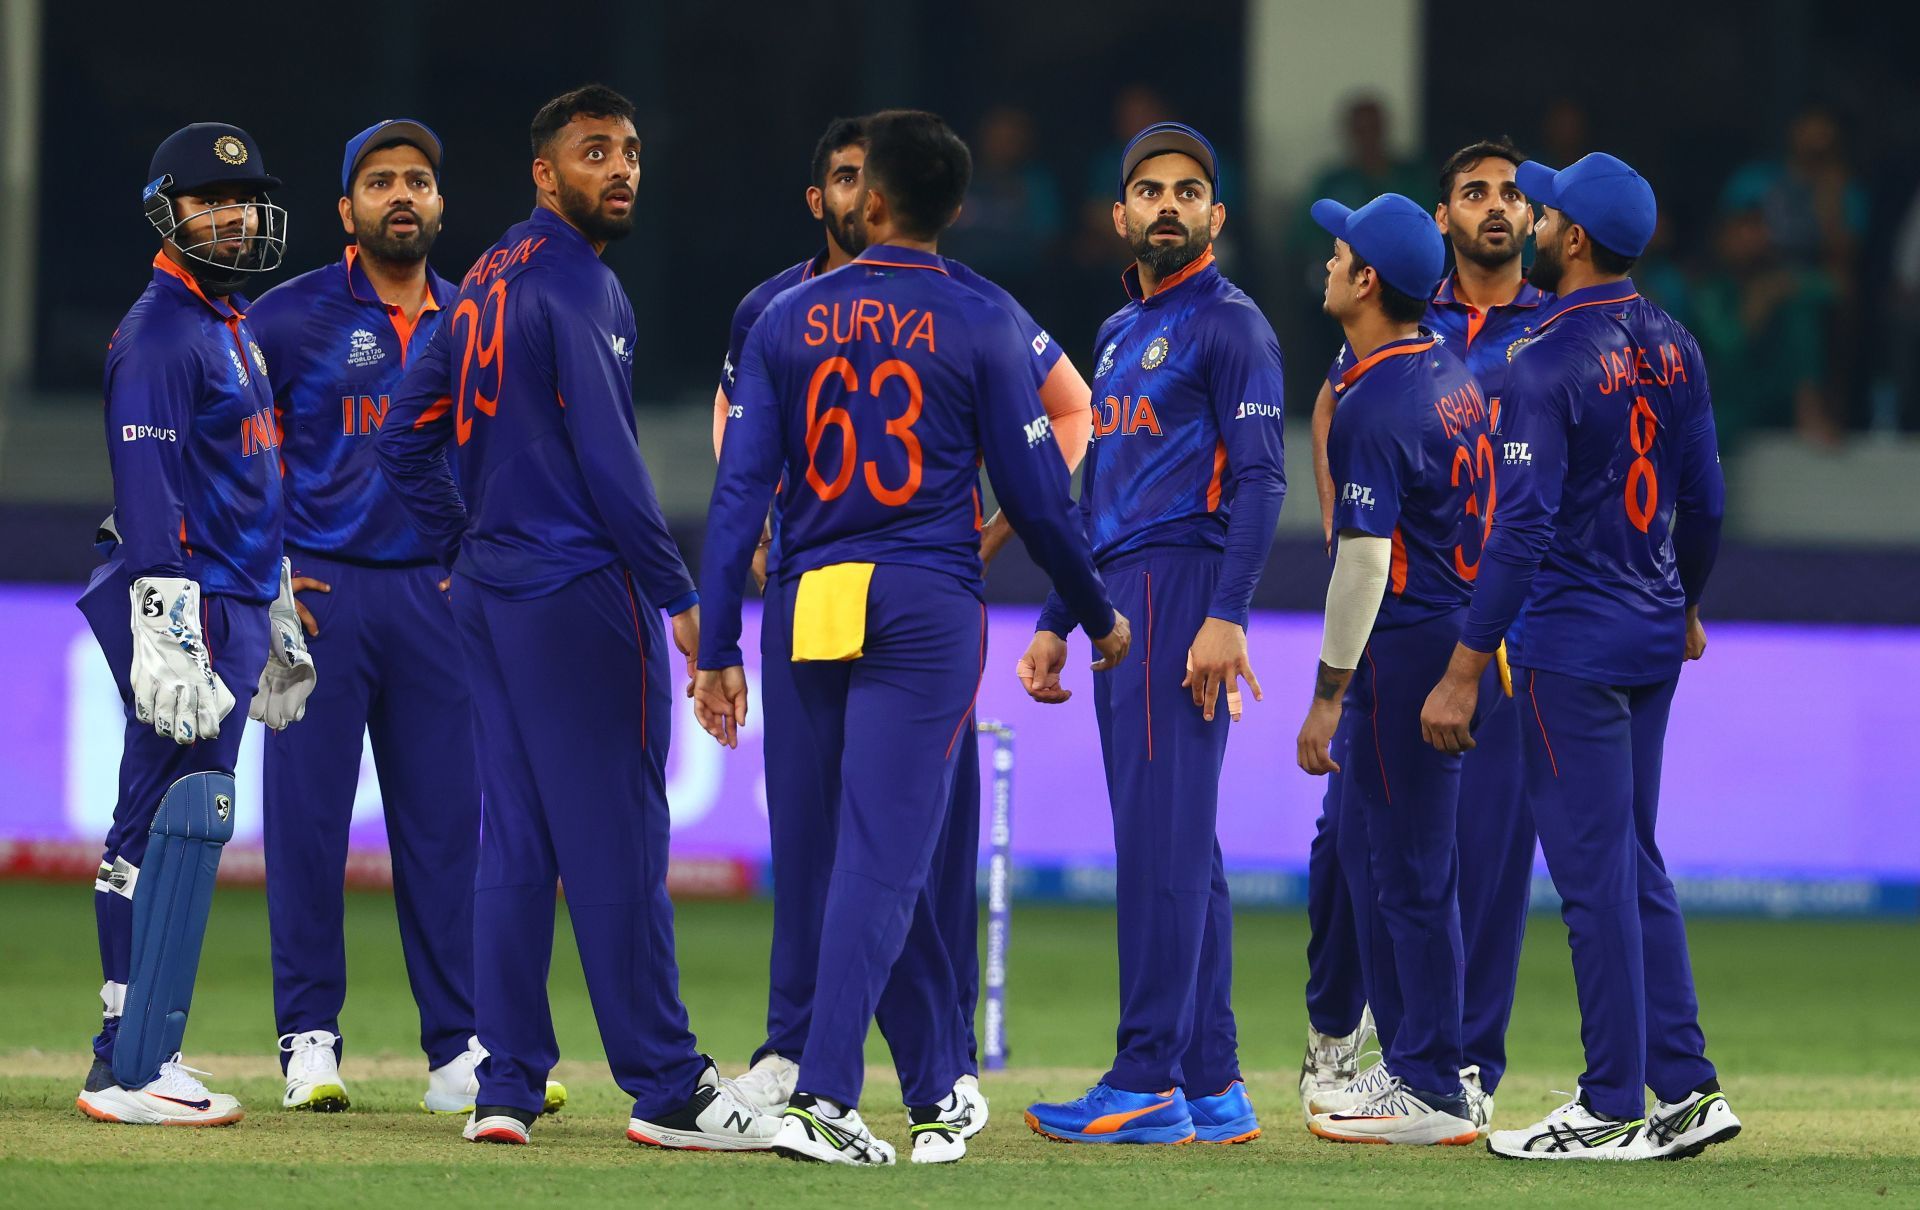 Indian cricket team. (Image source: Getty)